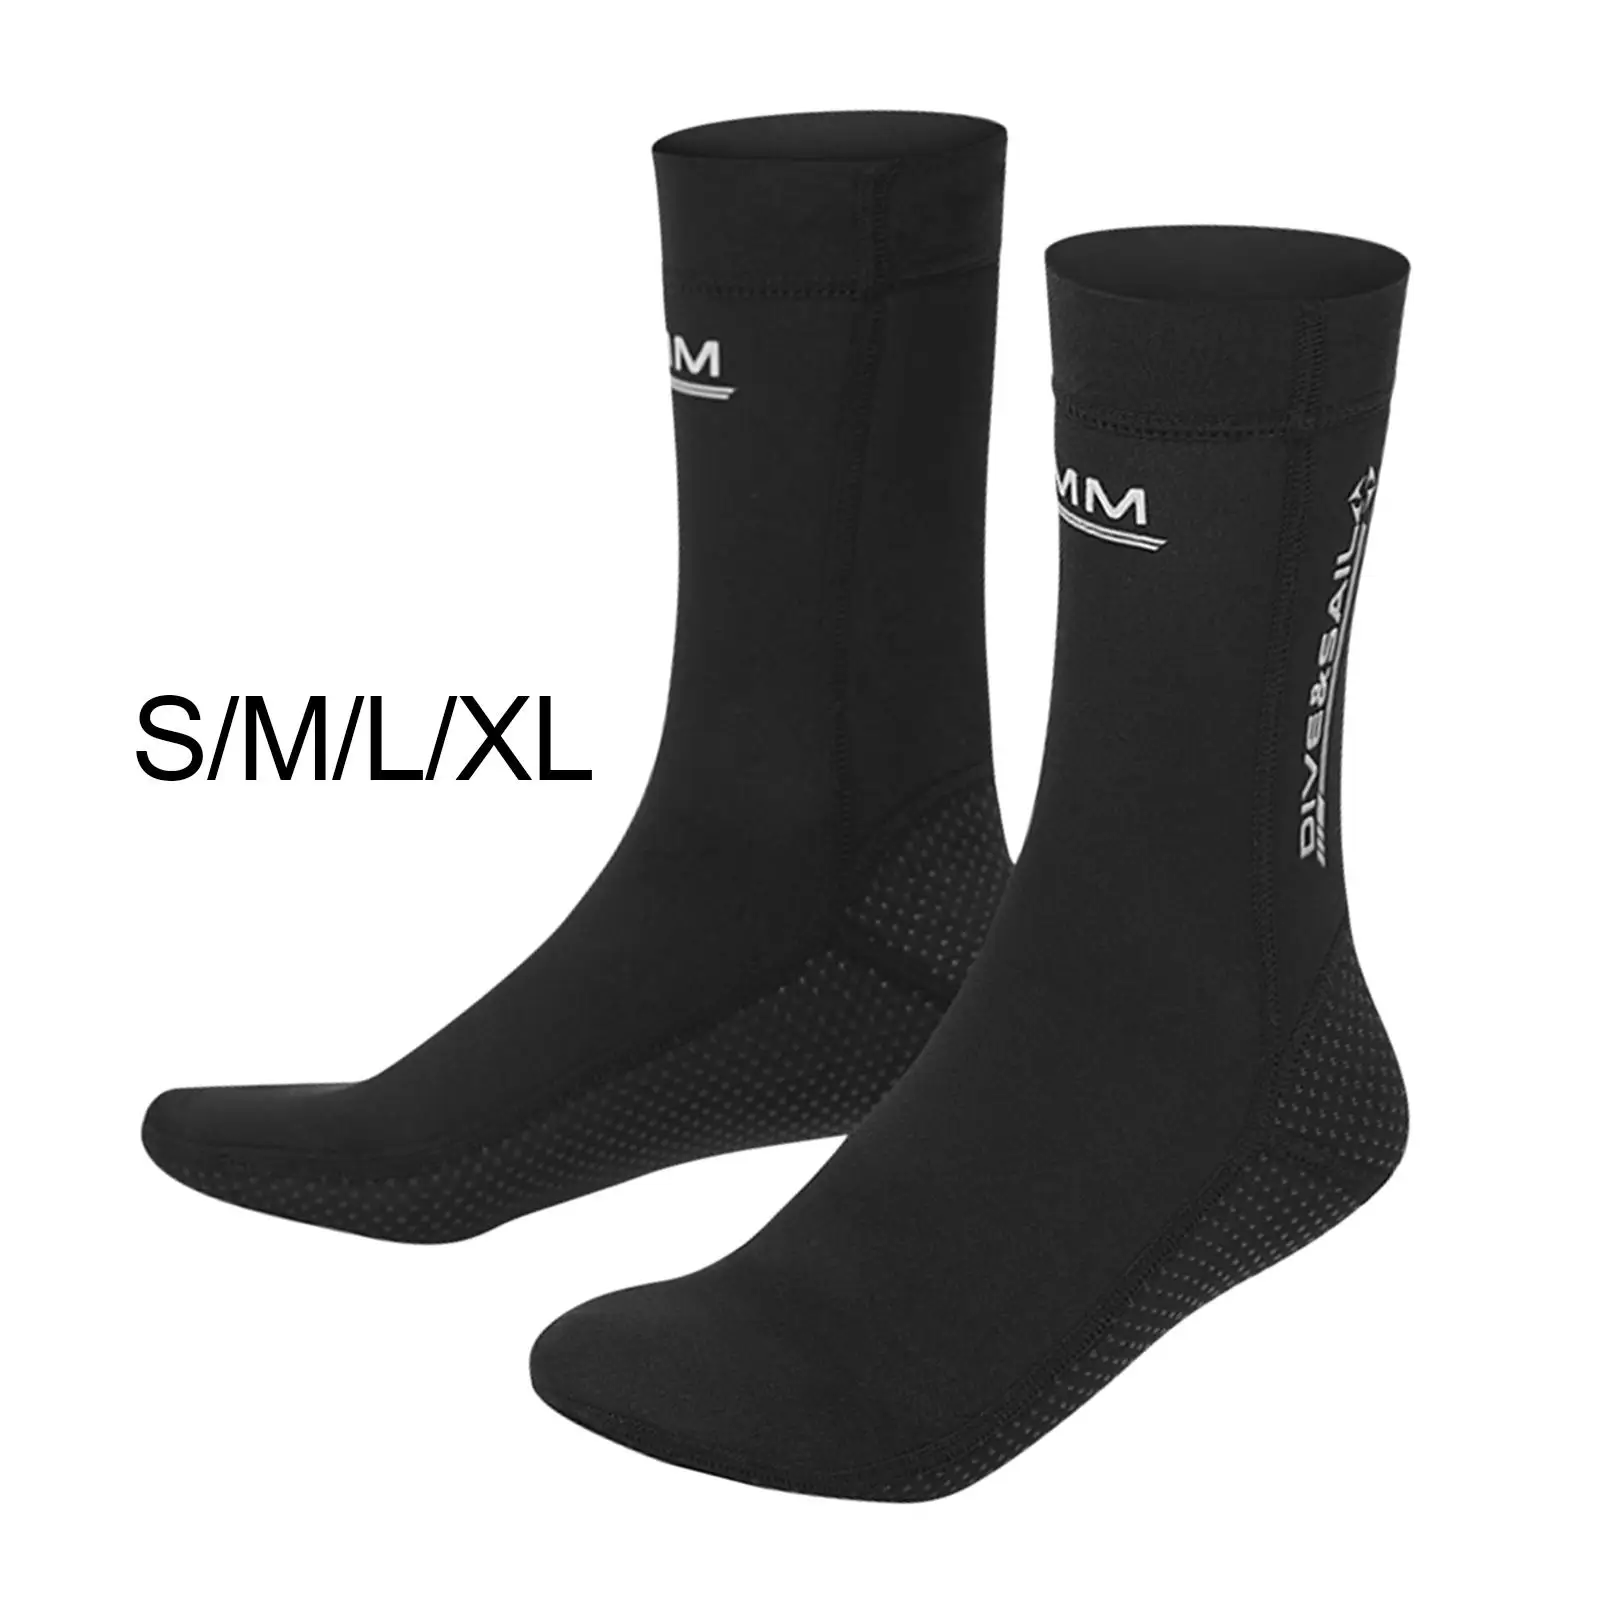 Diving Socks Thermal Anti Slip Beach Boots Sand Proof Water Resistant for Swimming Snorkeling Sailing Kayaking Unisex Adult